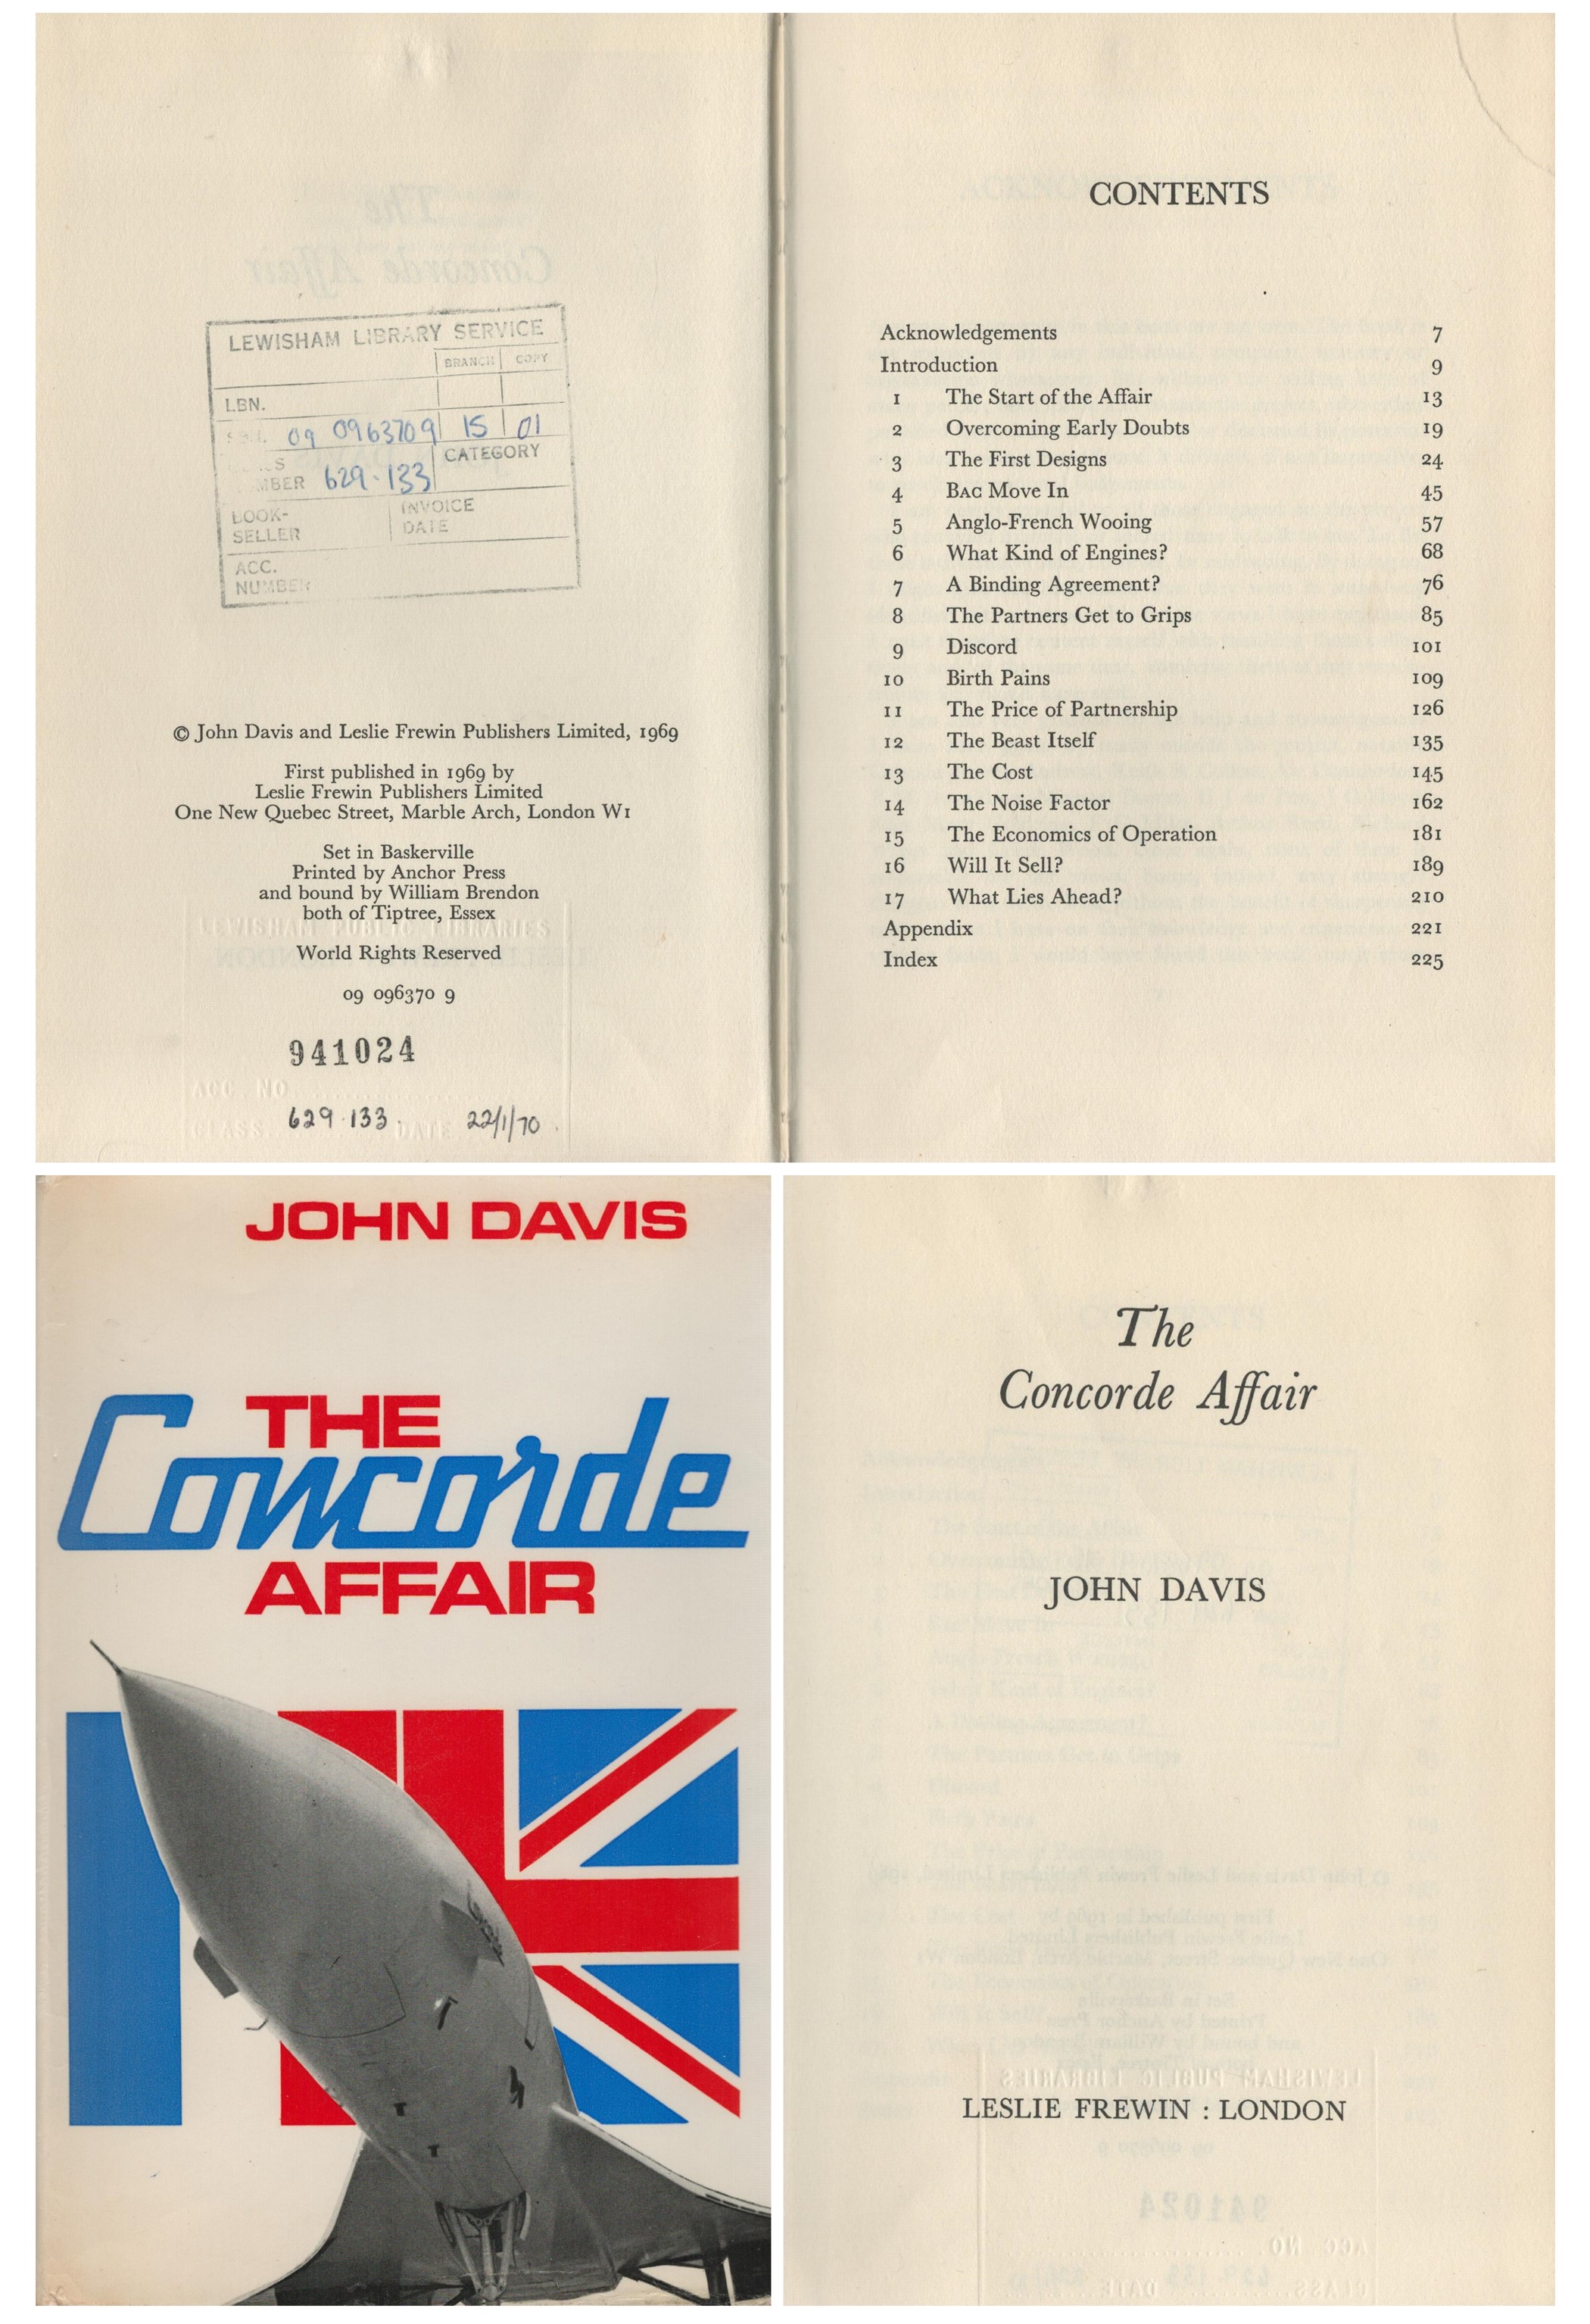 Concorde hardback book titled The Concorde Affair by the author John Davis 1969 publication 229 - Image 3 of 3